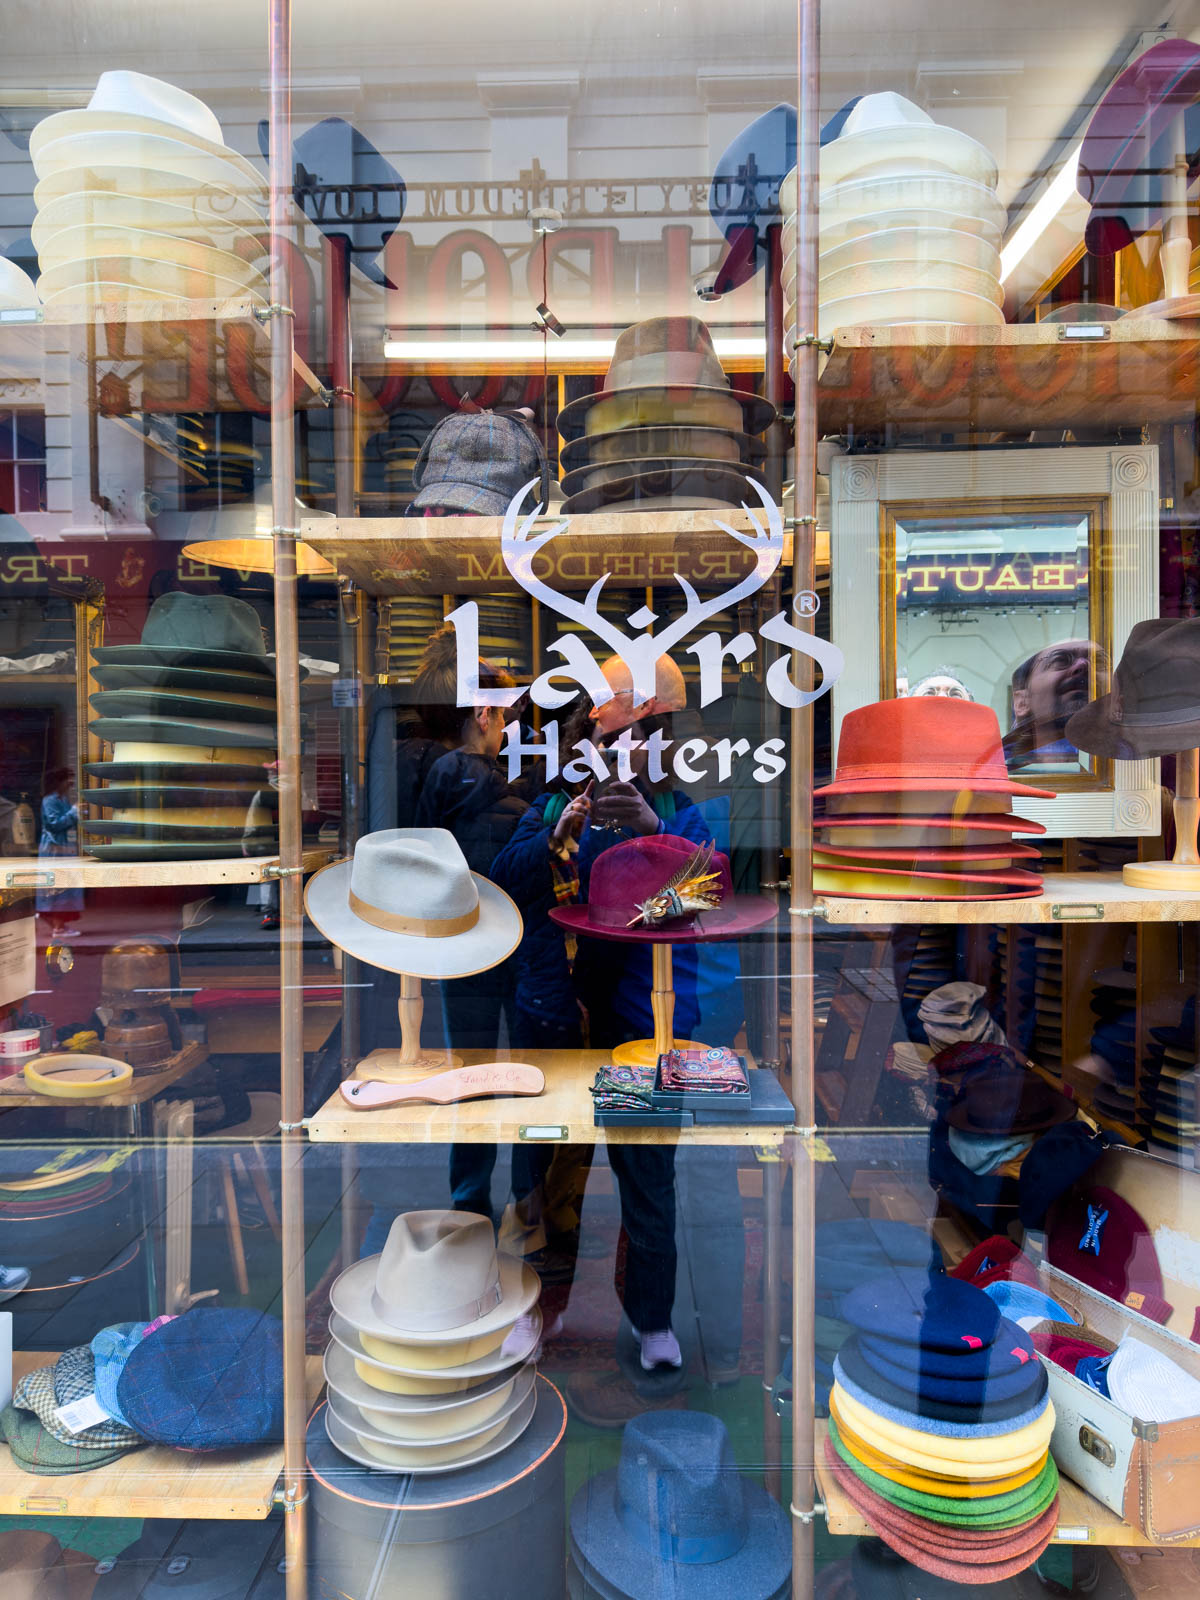 The outside of the hat shop.